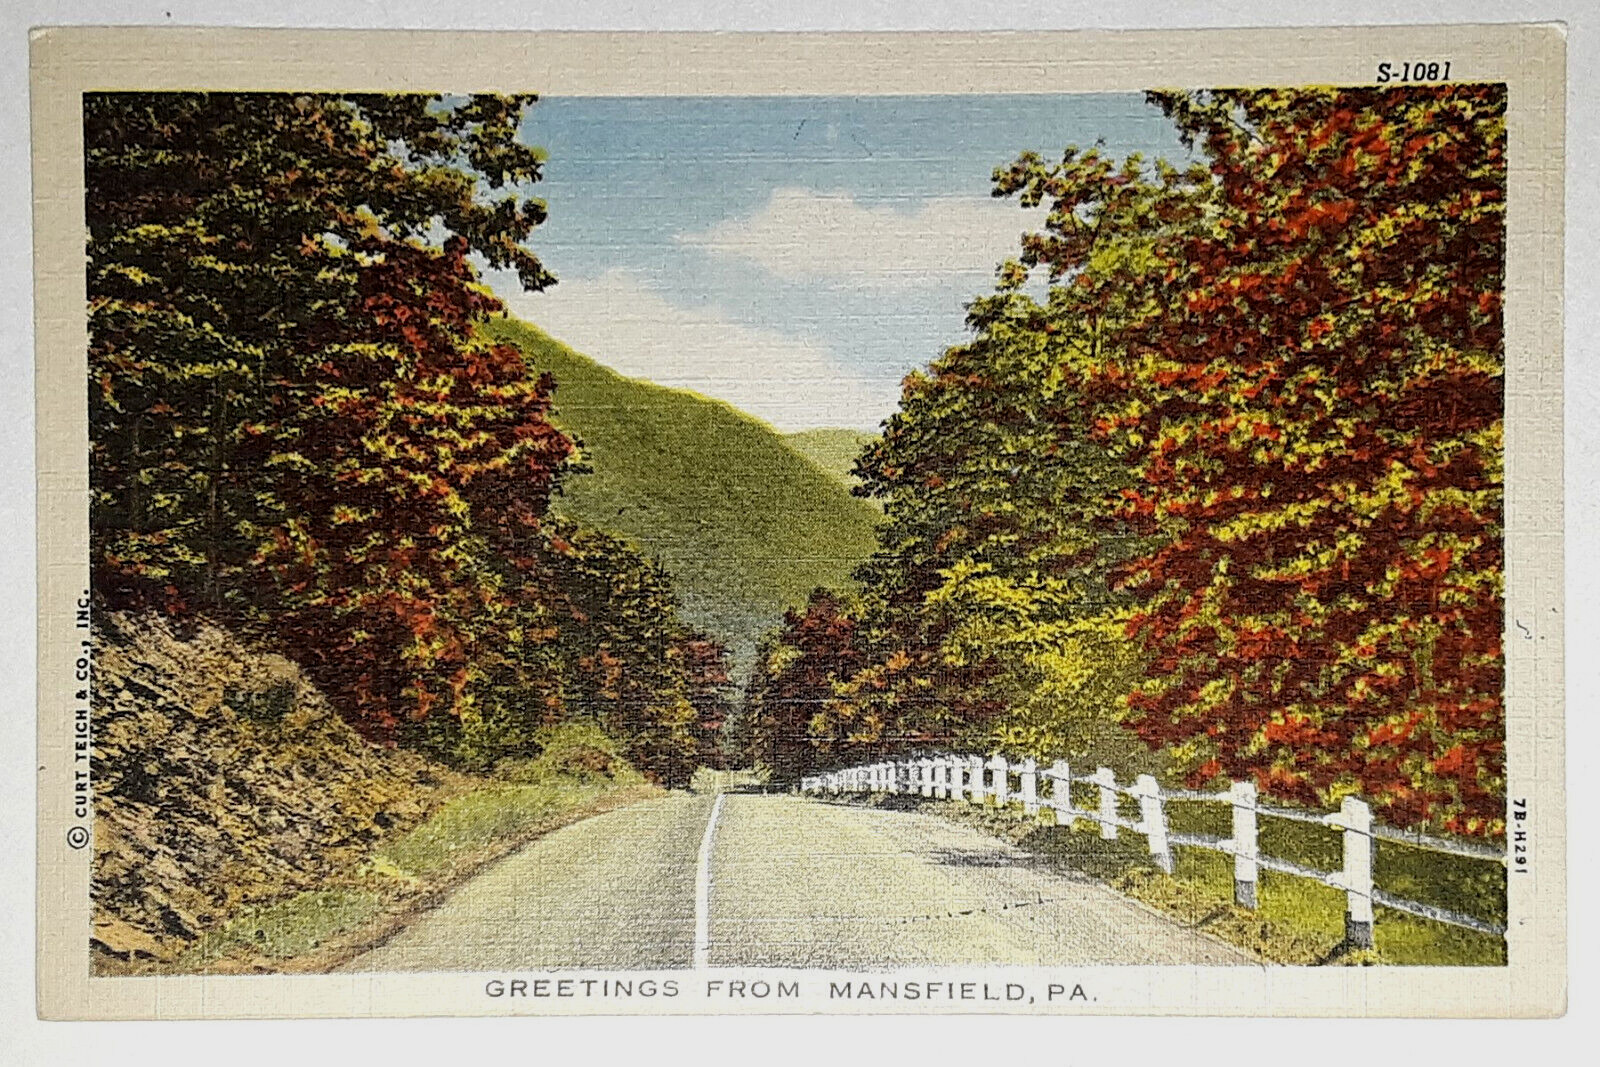 Greetings From Mansfield, PA., pub Curteich, Pennsylvania, linen - Unposted